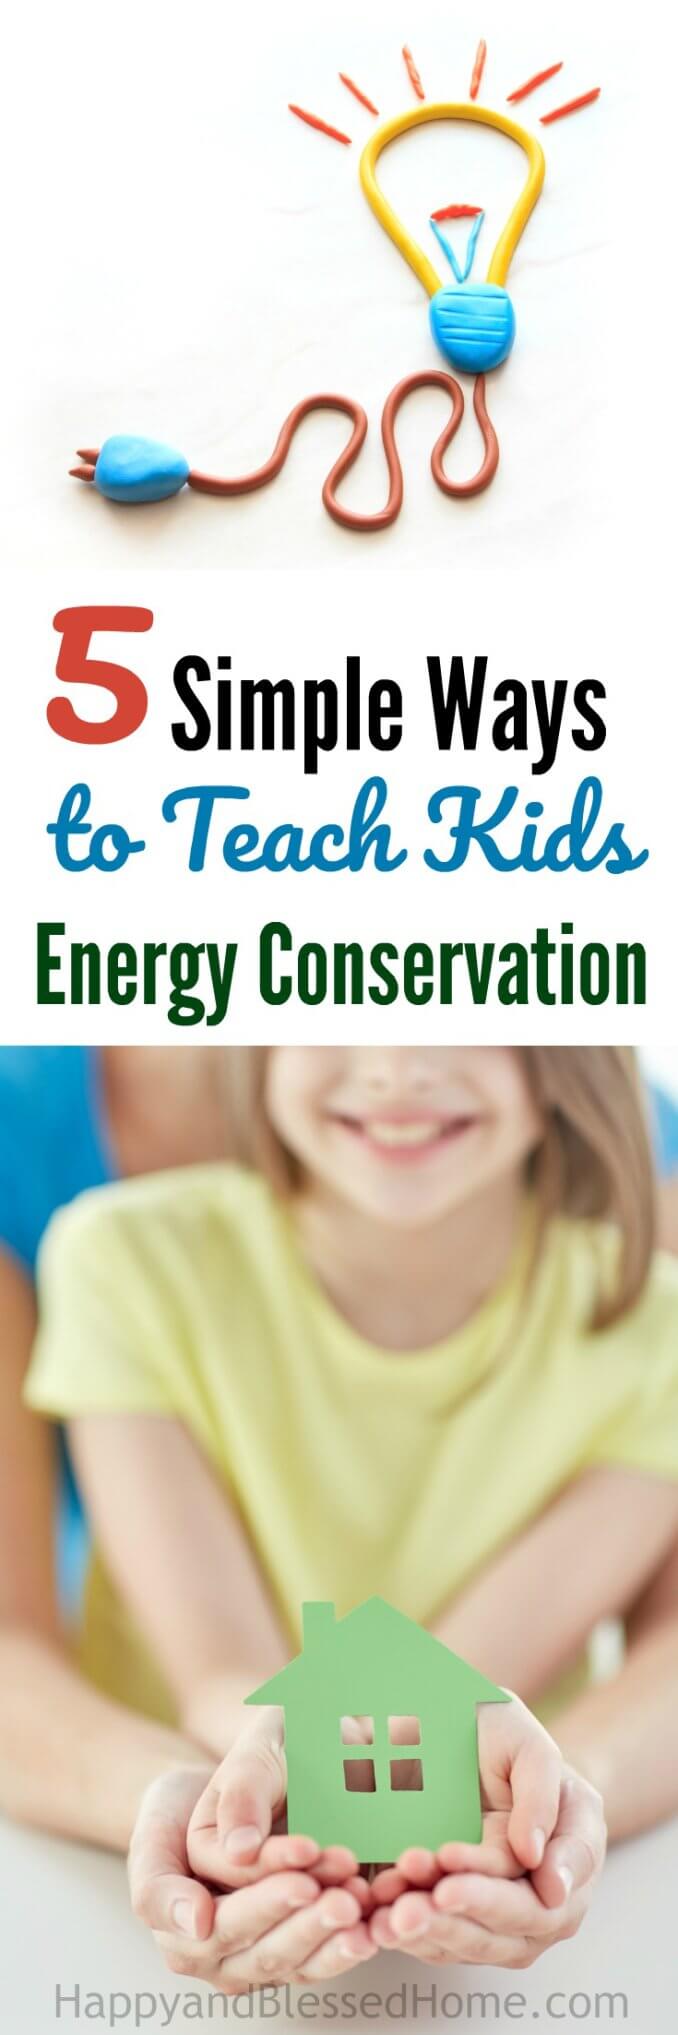 5 Simple Ways to Teach Kids the Importance of Energy Conservation